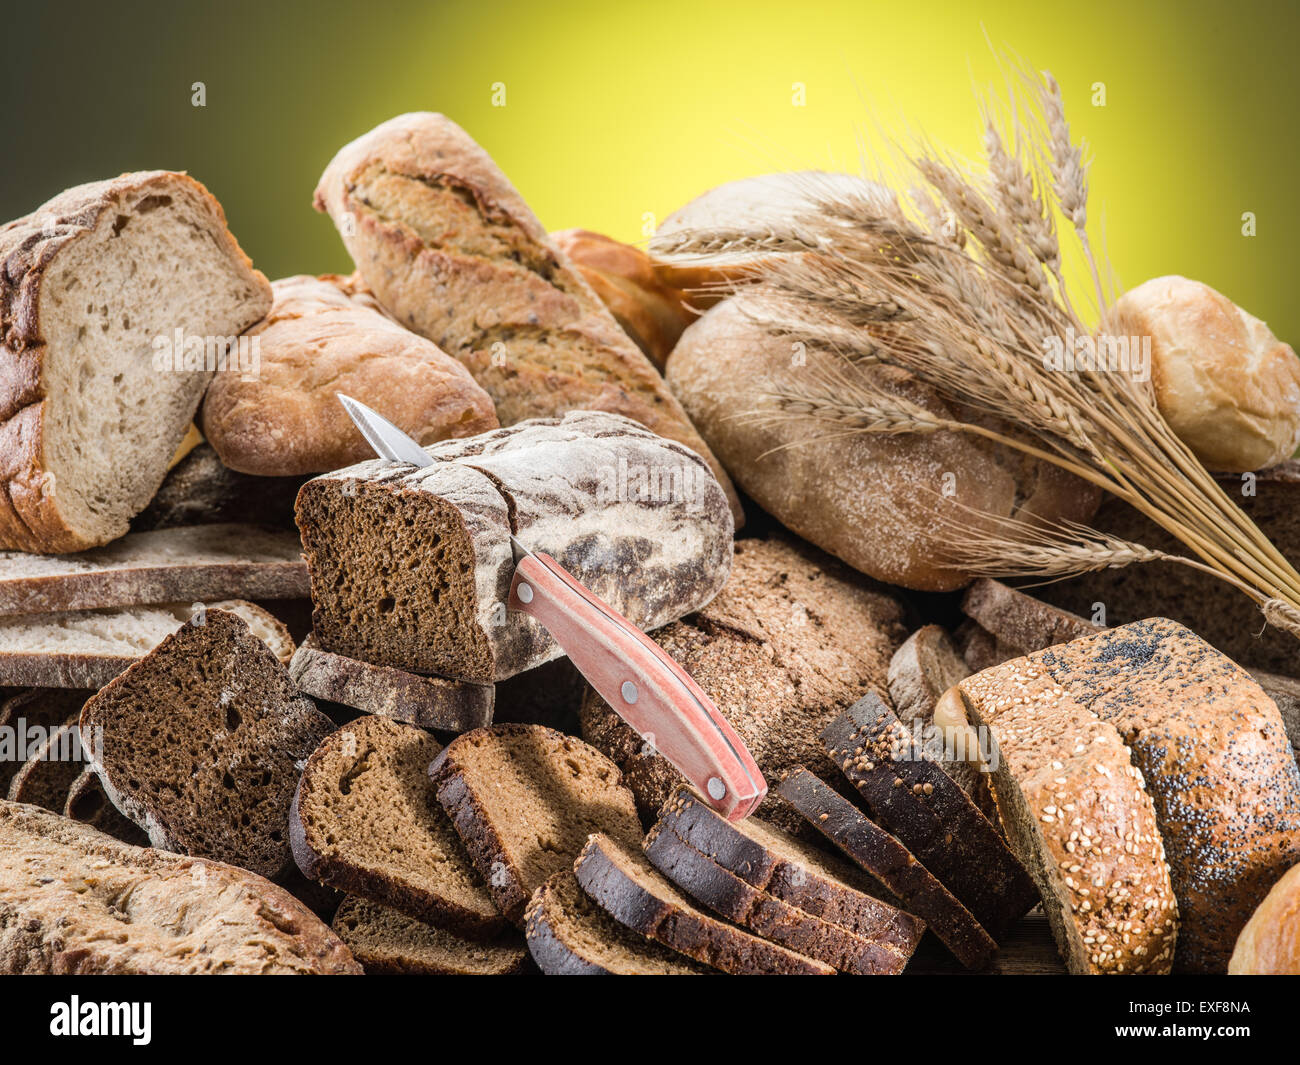 Different types of bread. Food background. Stock Photo